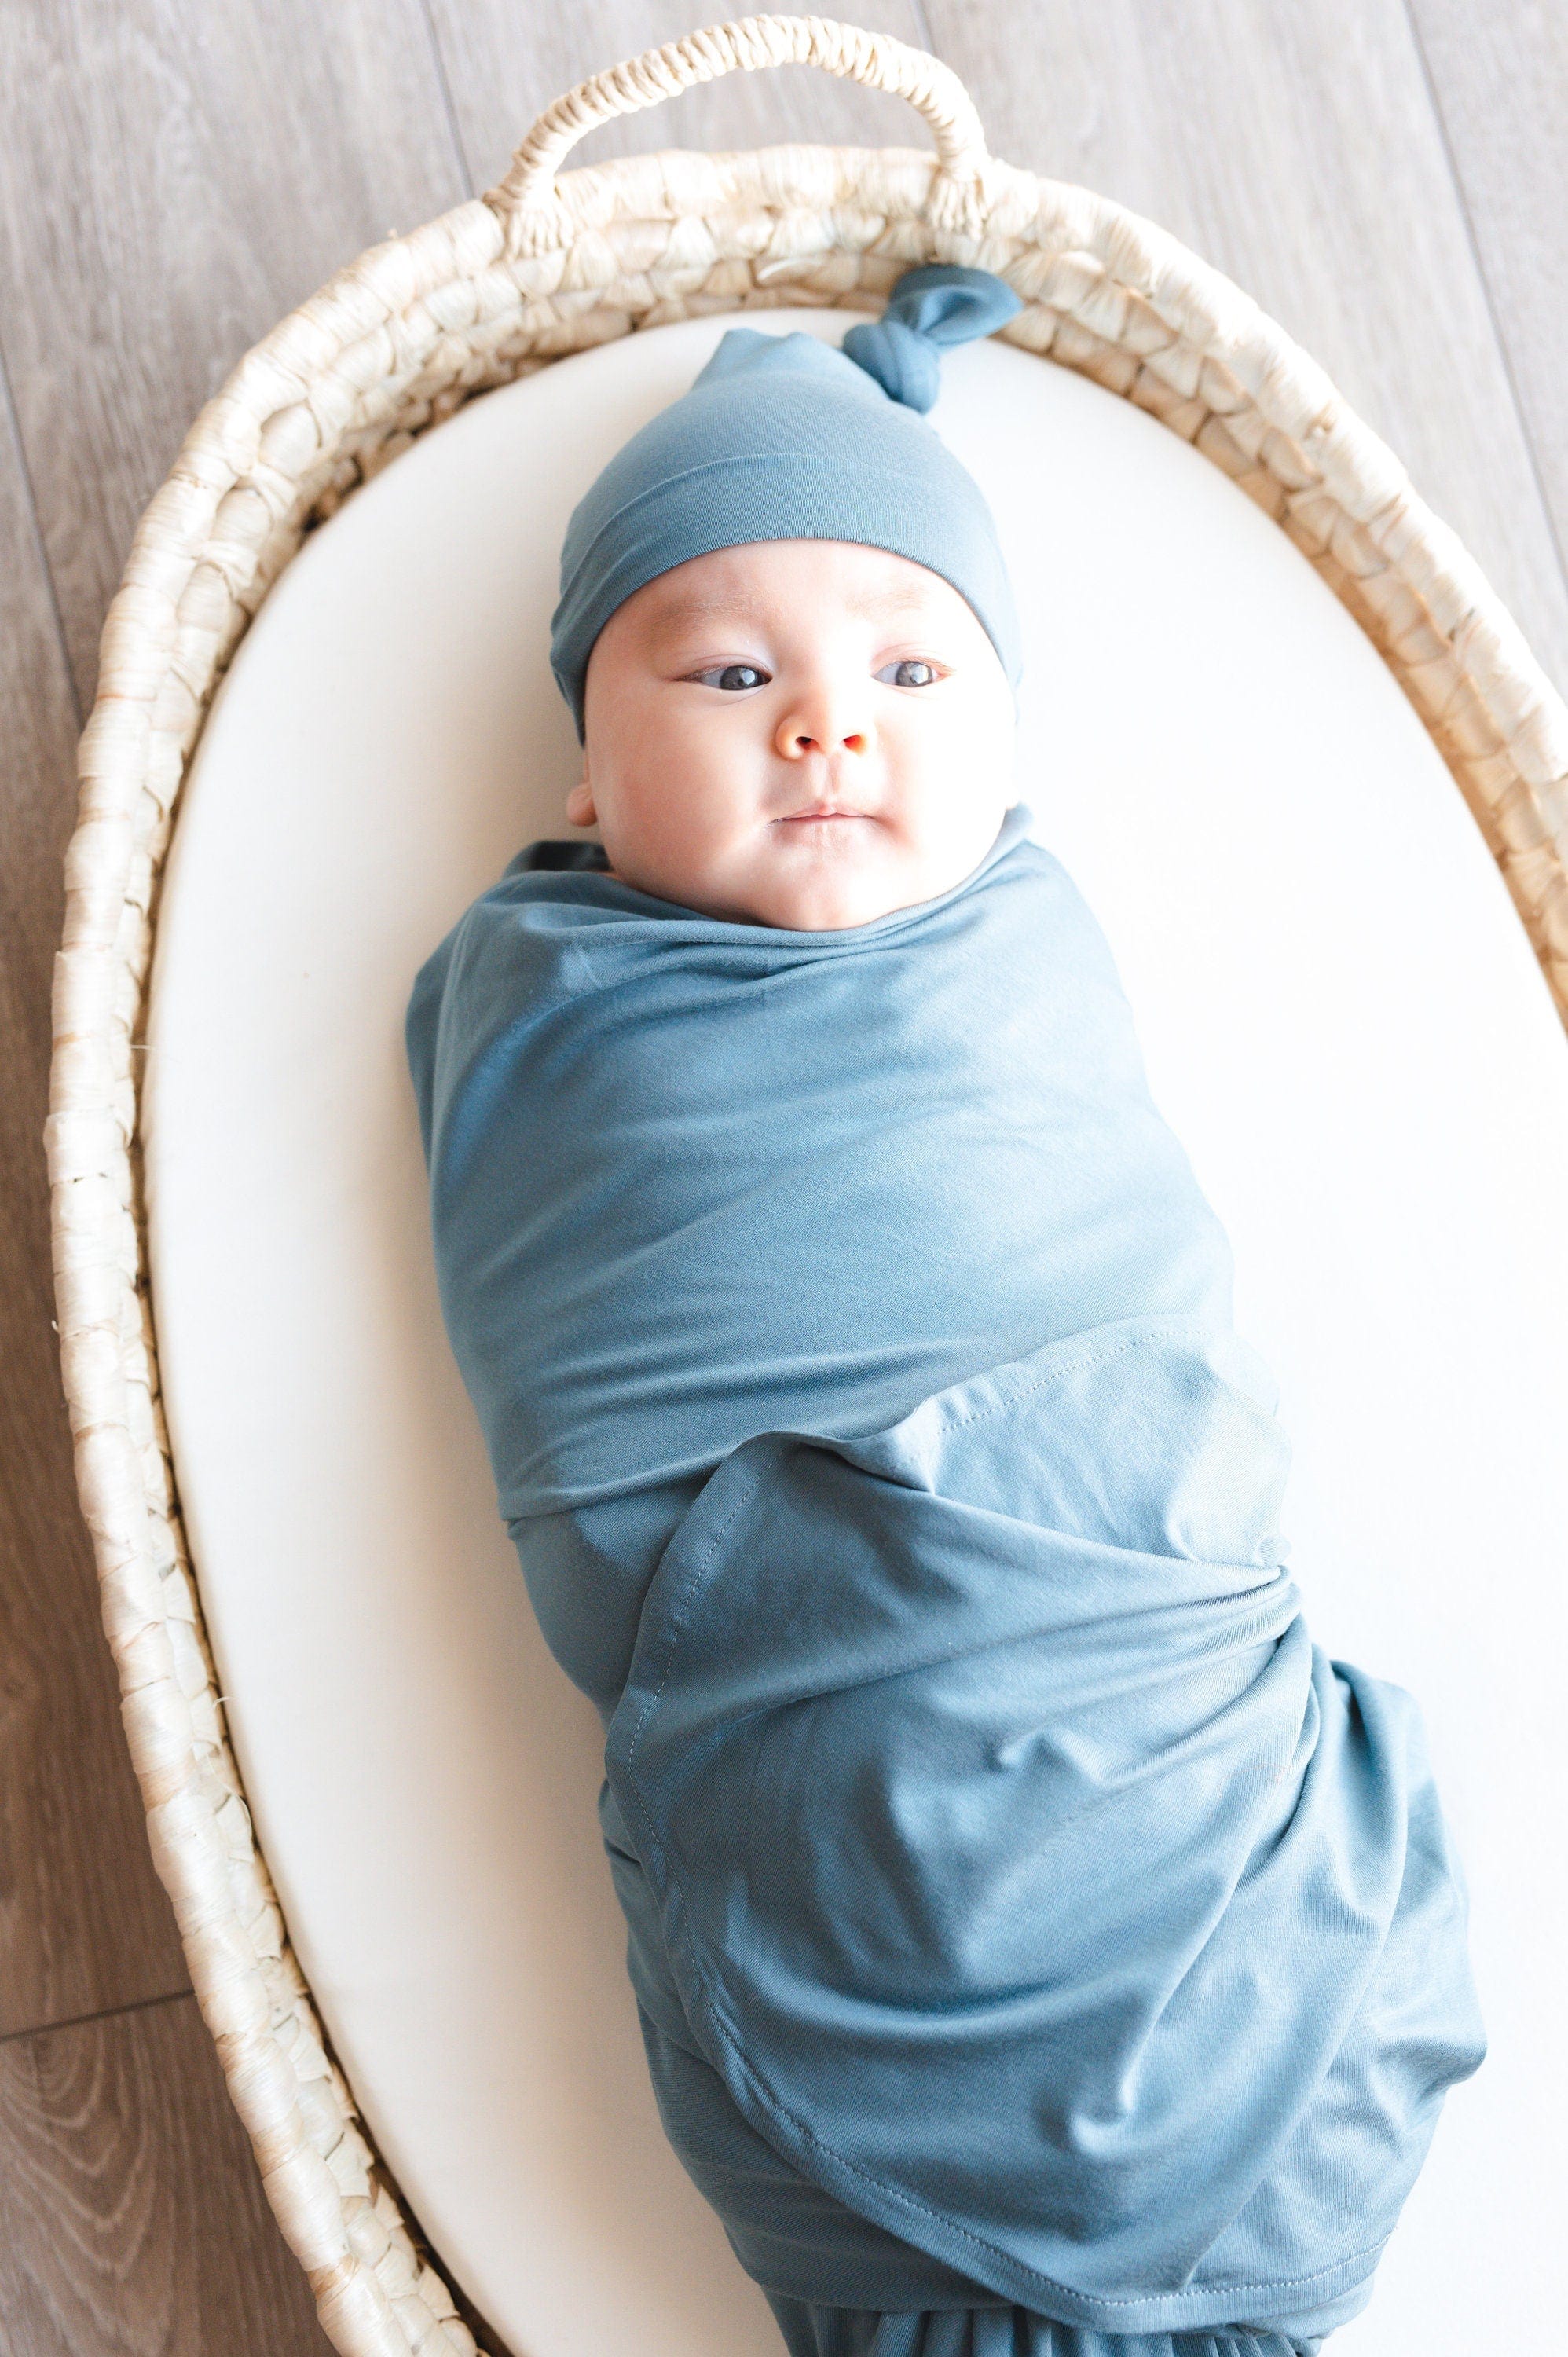 DROPPING FRIDAY! Knit Baby Swaddle in Blue, Baby Blanket, Butter Soft Swaddle, 48 x 48, Large Swaddle, Baby Gift, Baby Shower Gift,